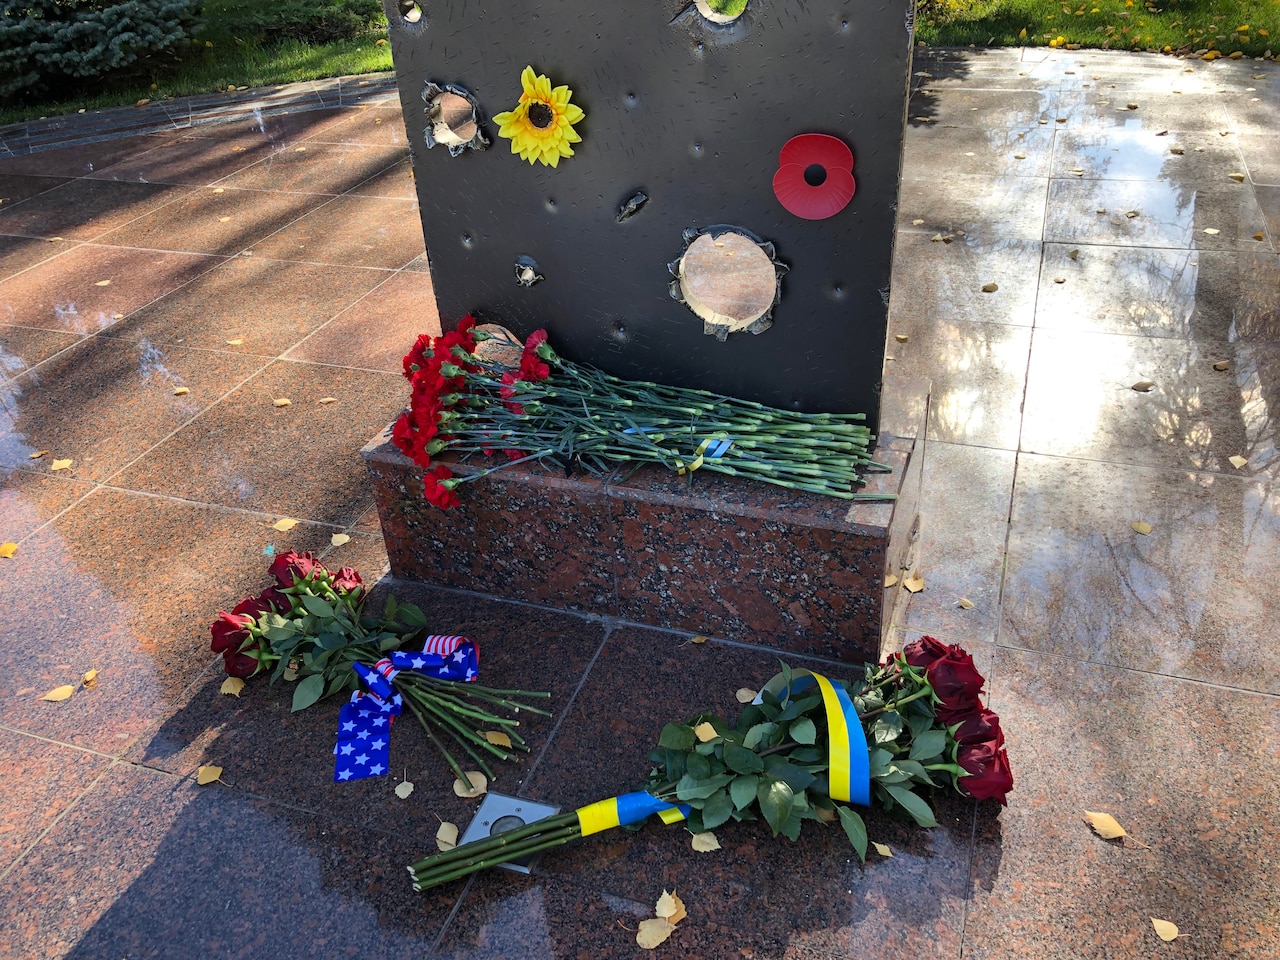 Bouquets of flowers are at the foot of a memorial pierced by armor rounds.